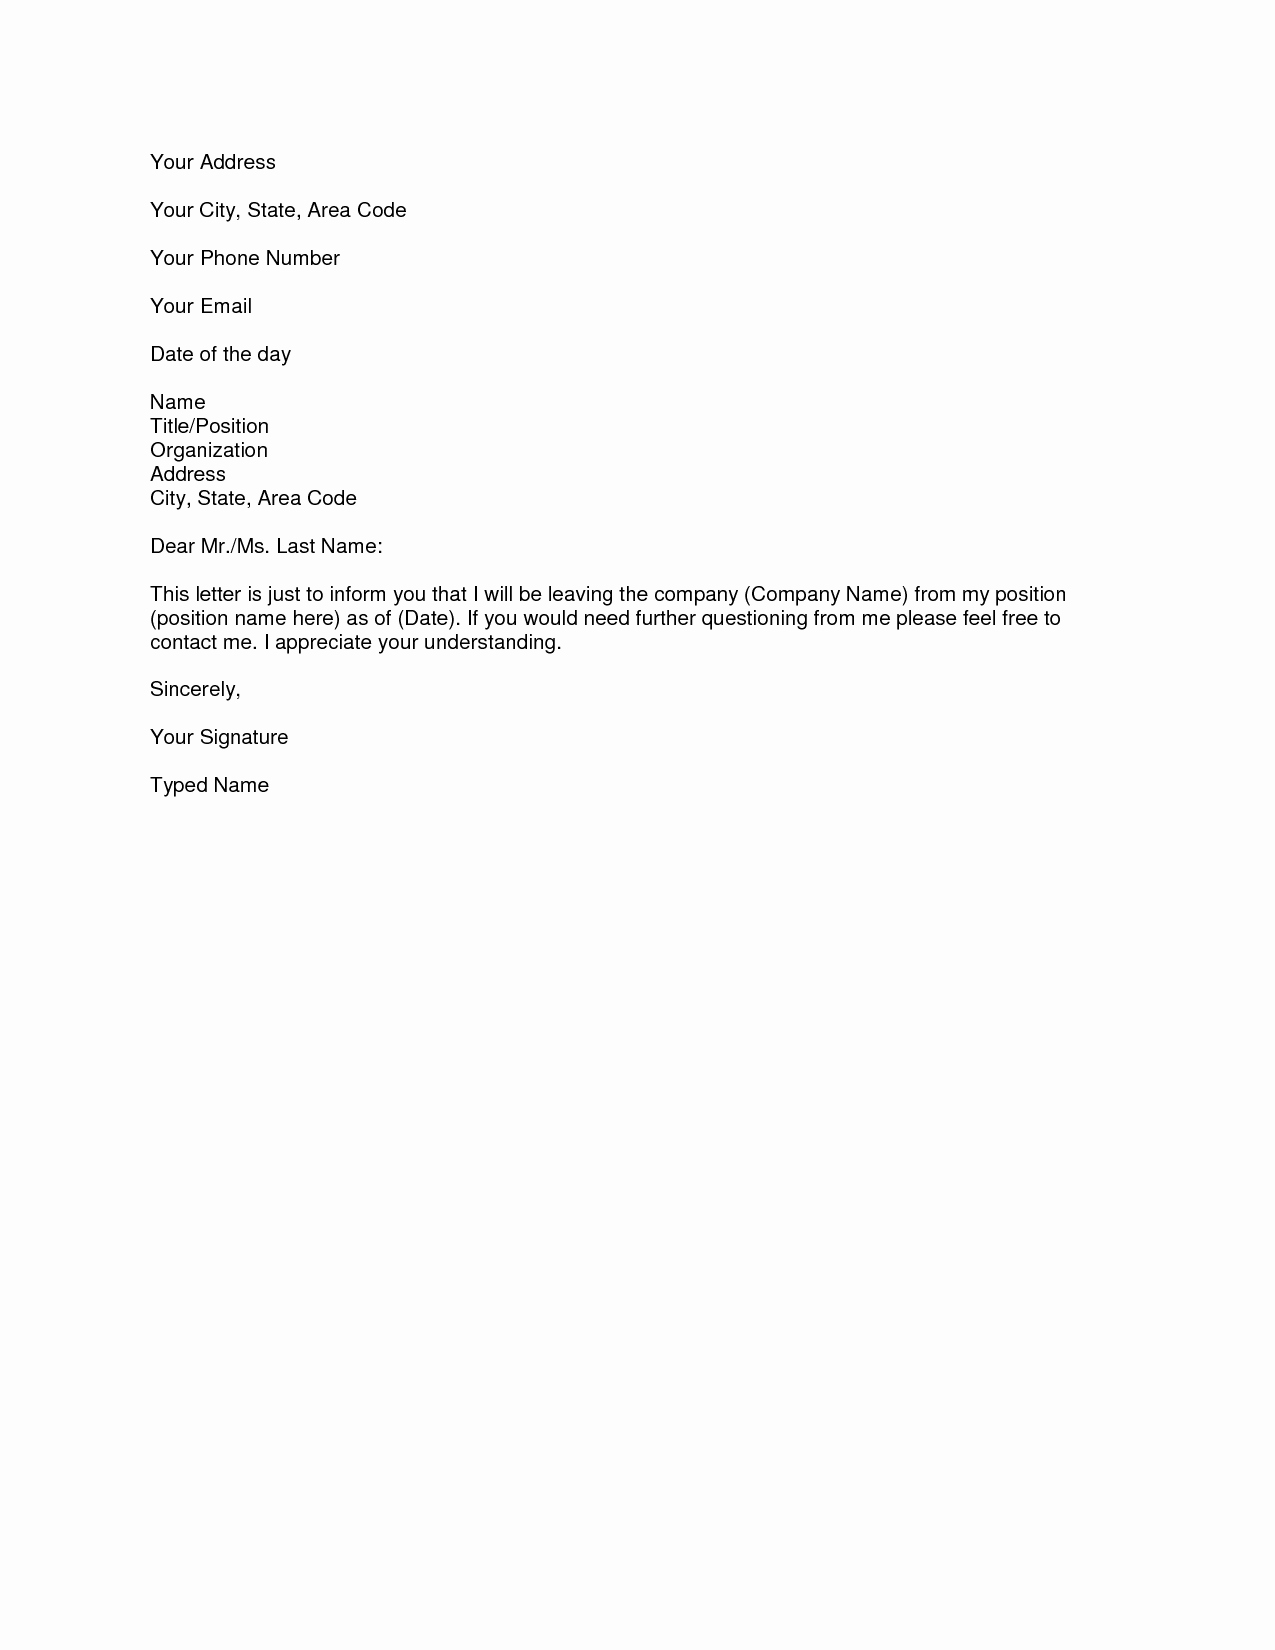 Letter Of Resignation Template Microsoft New Microsoft Word Resignation Letter Template Simple